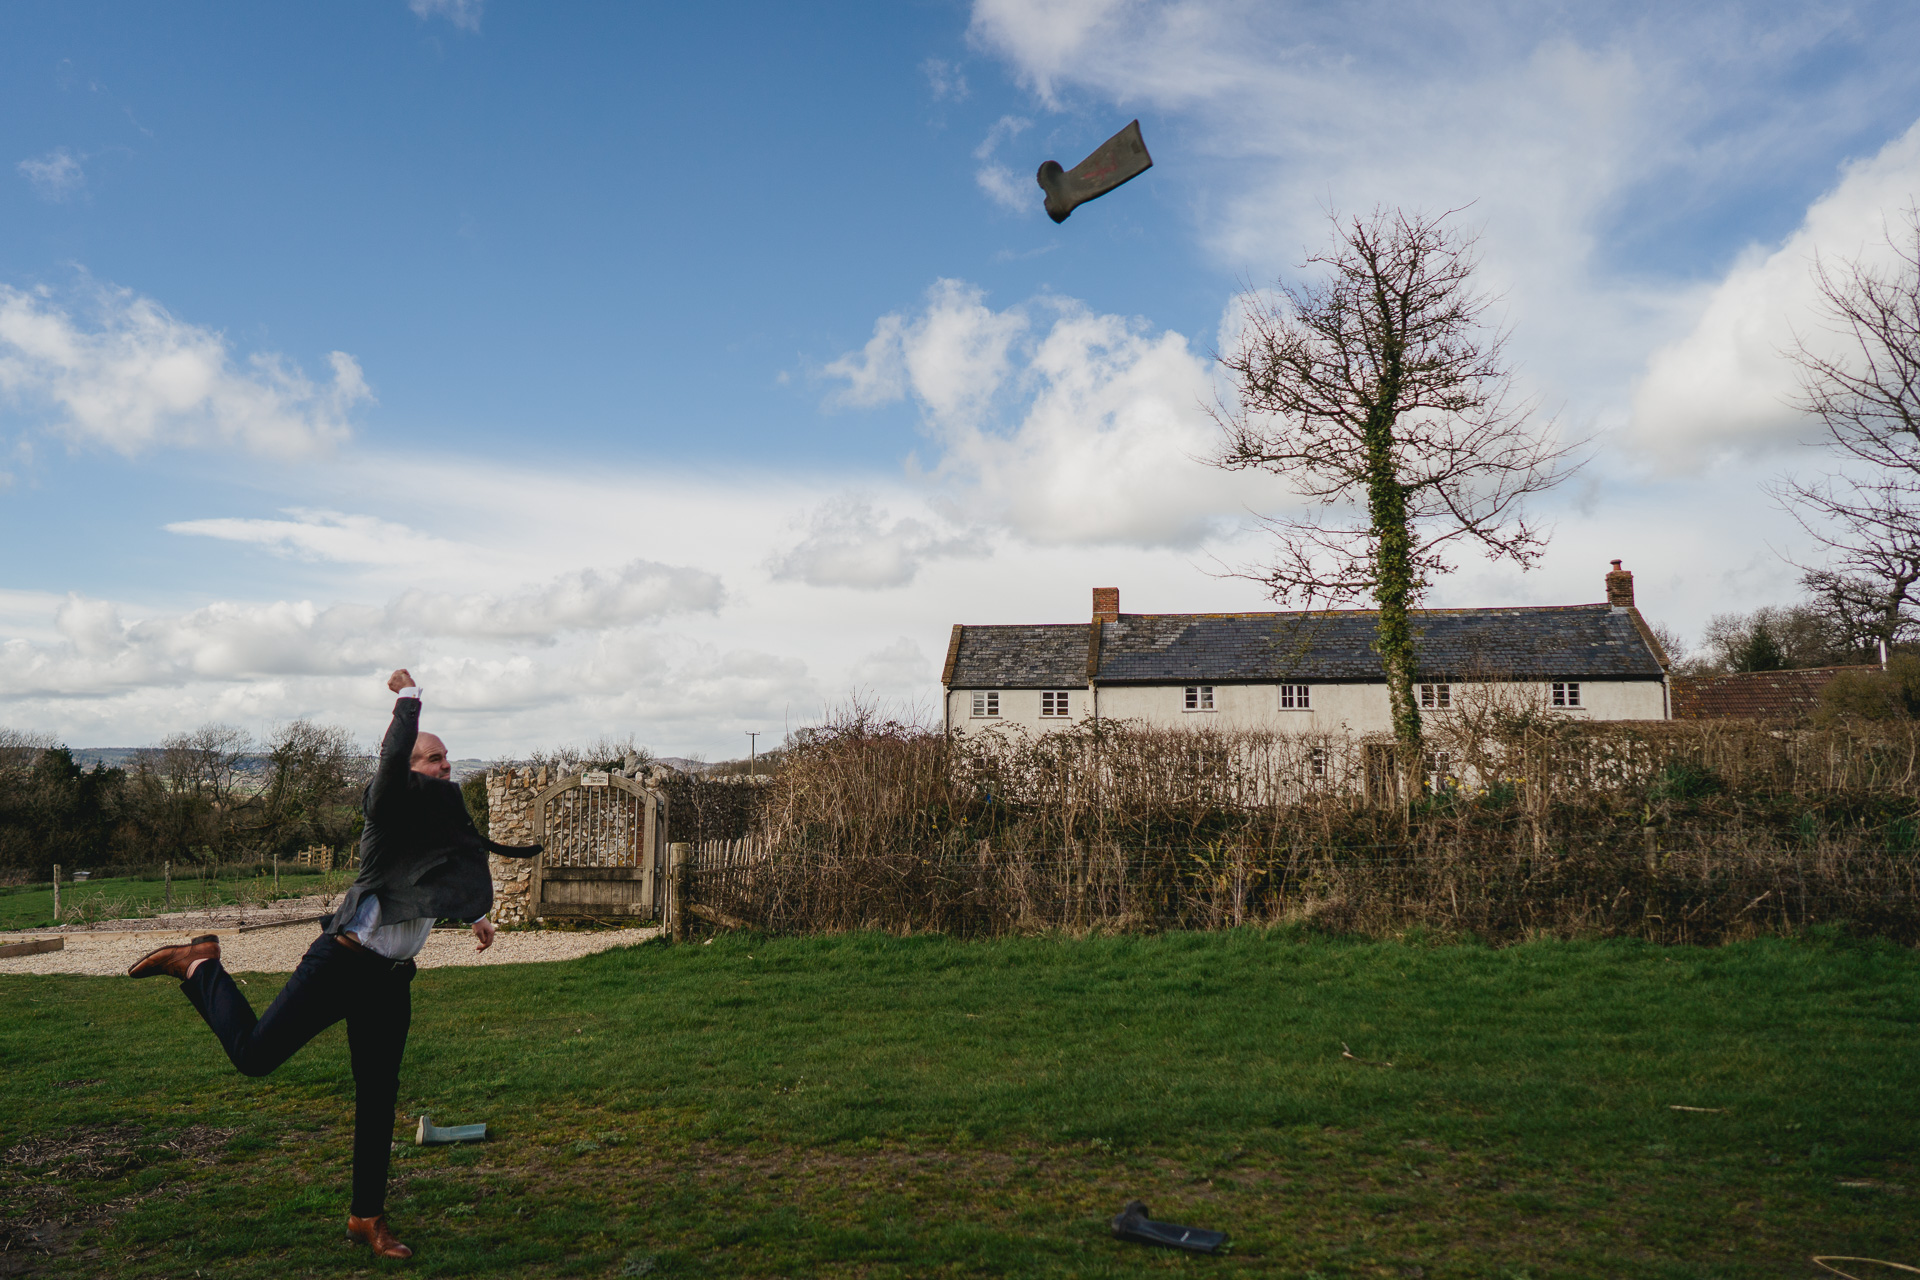 A wedding guest throwing a welly in front of River Cottage farmhouse